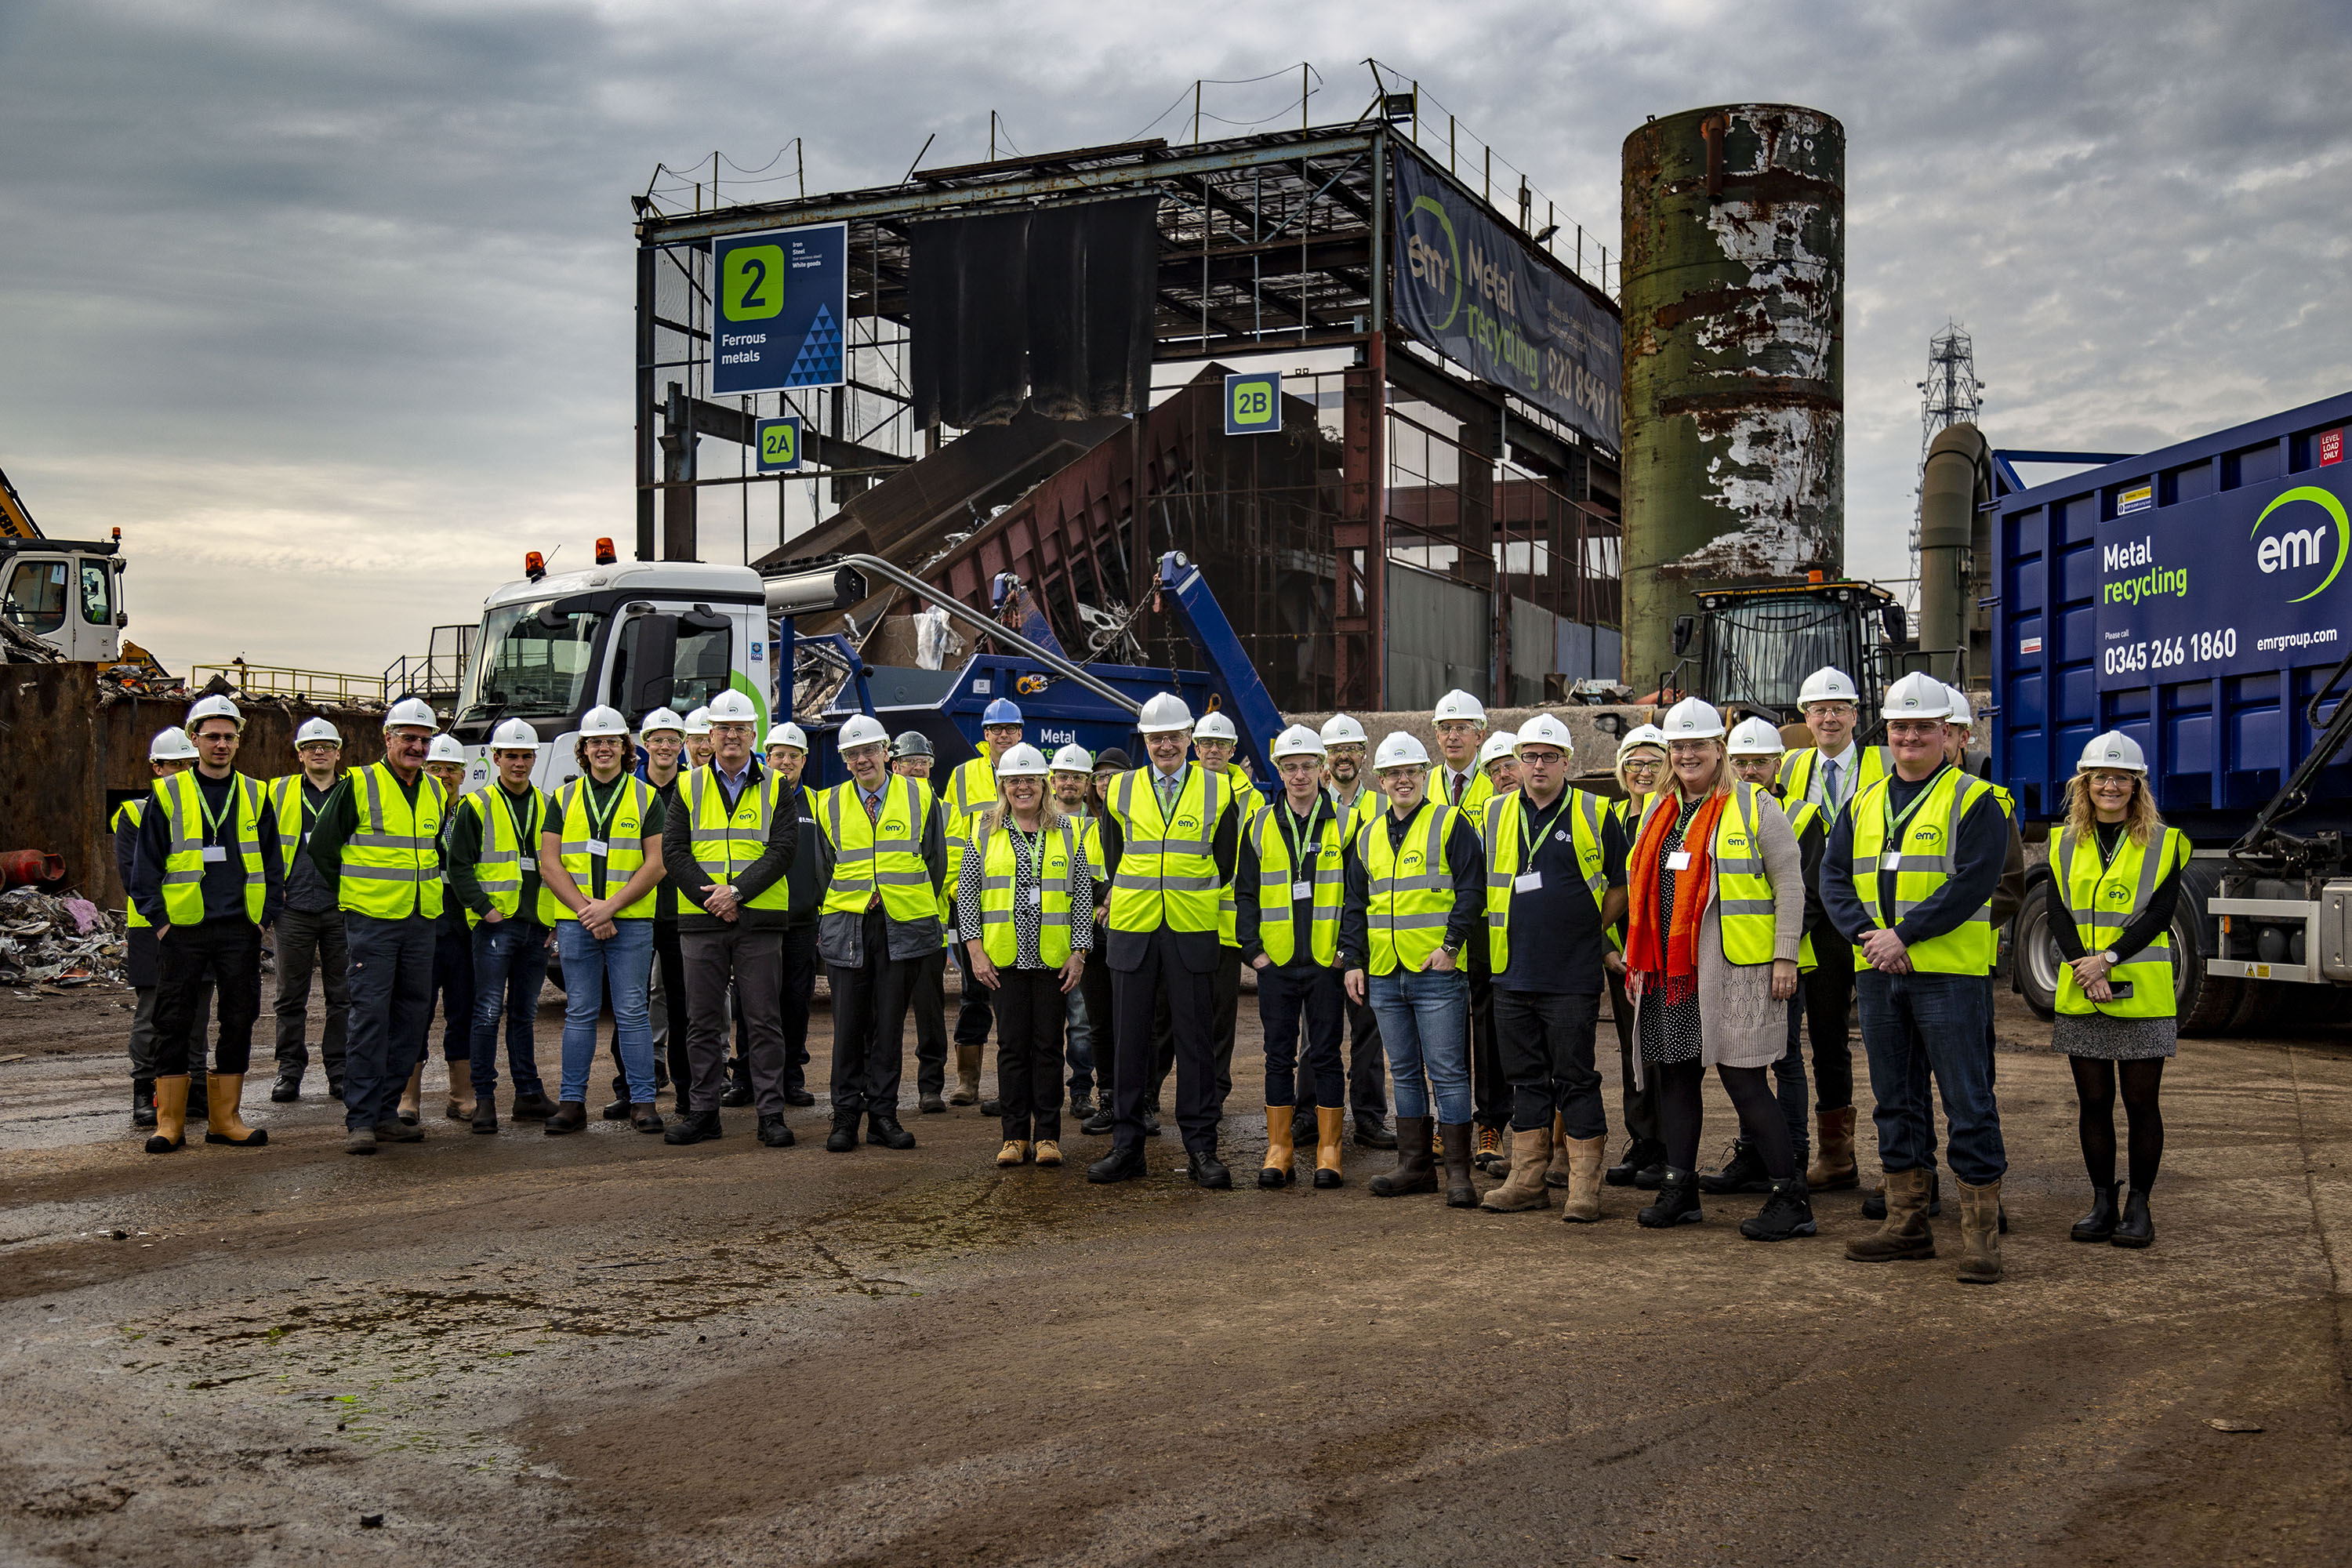 Guests at the metal recycling apprenticeship event